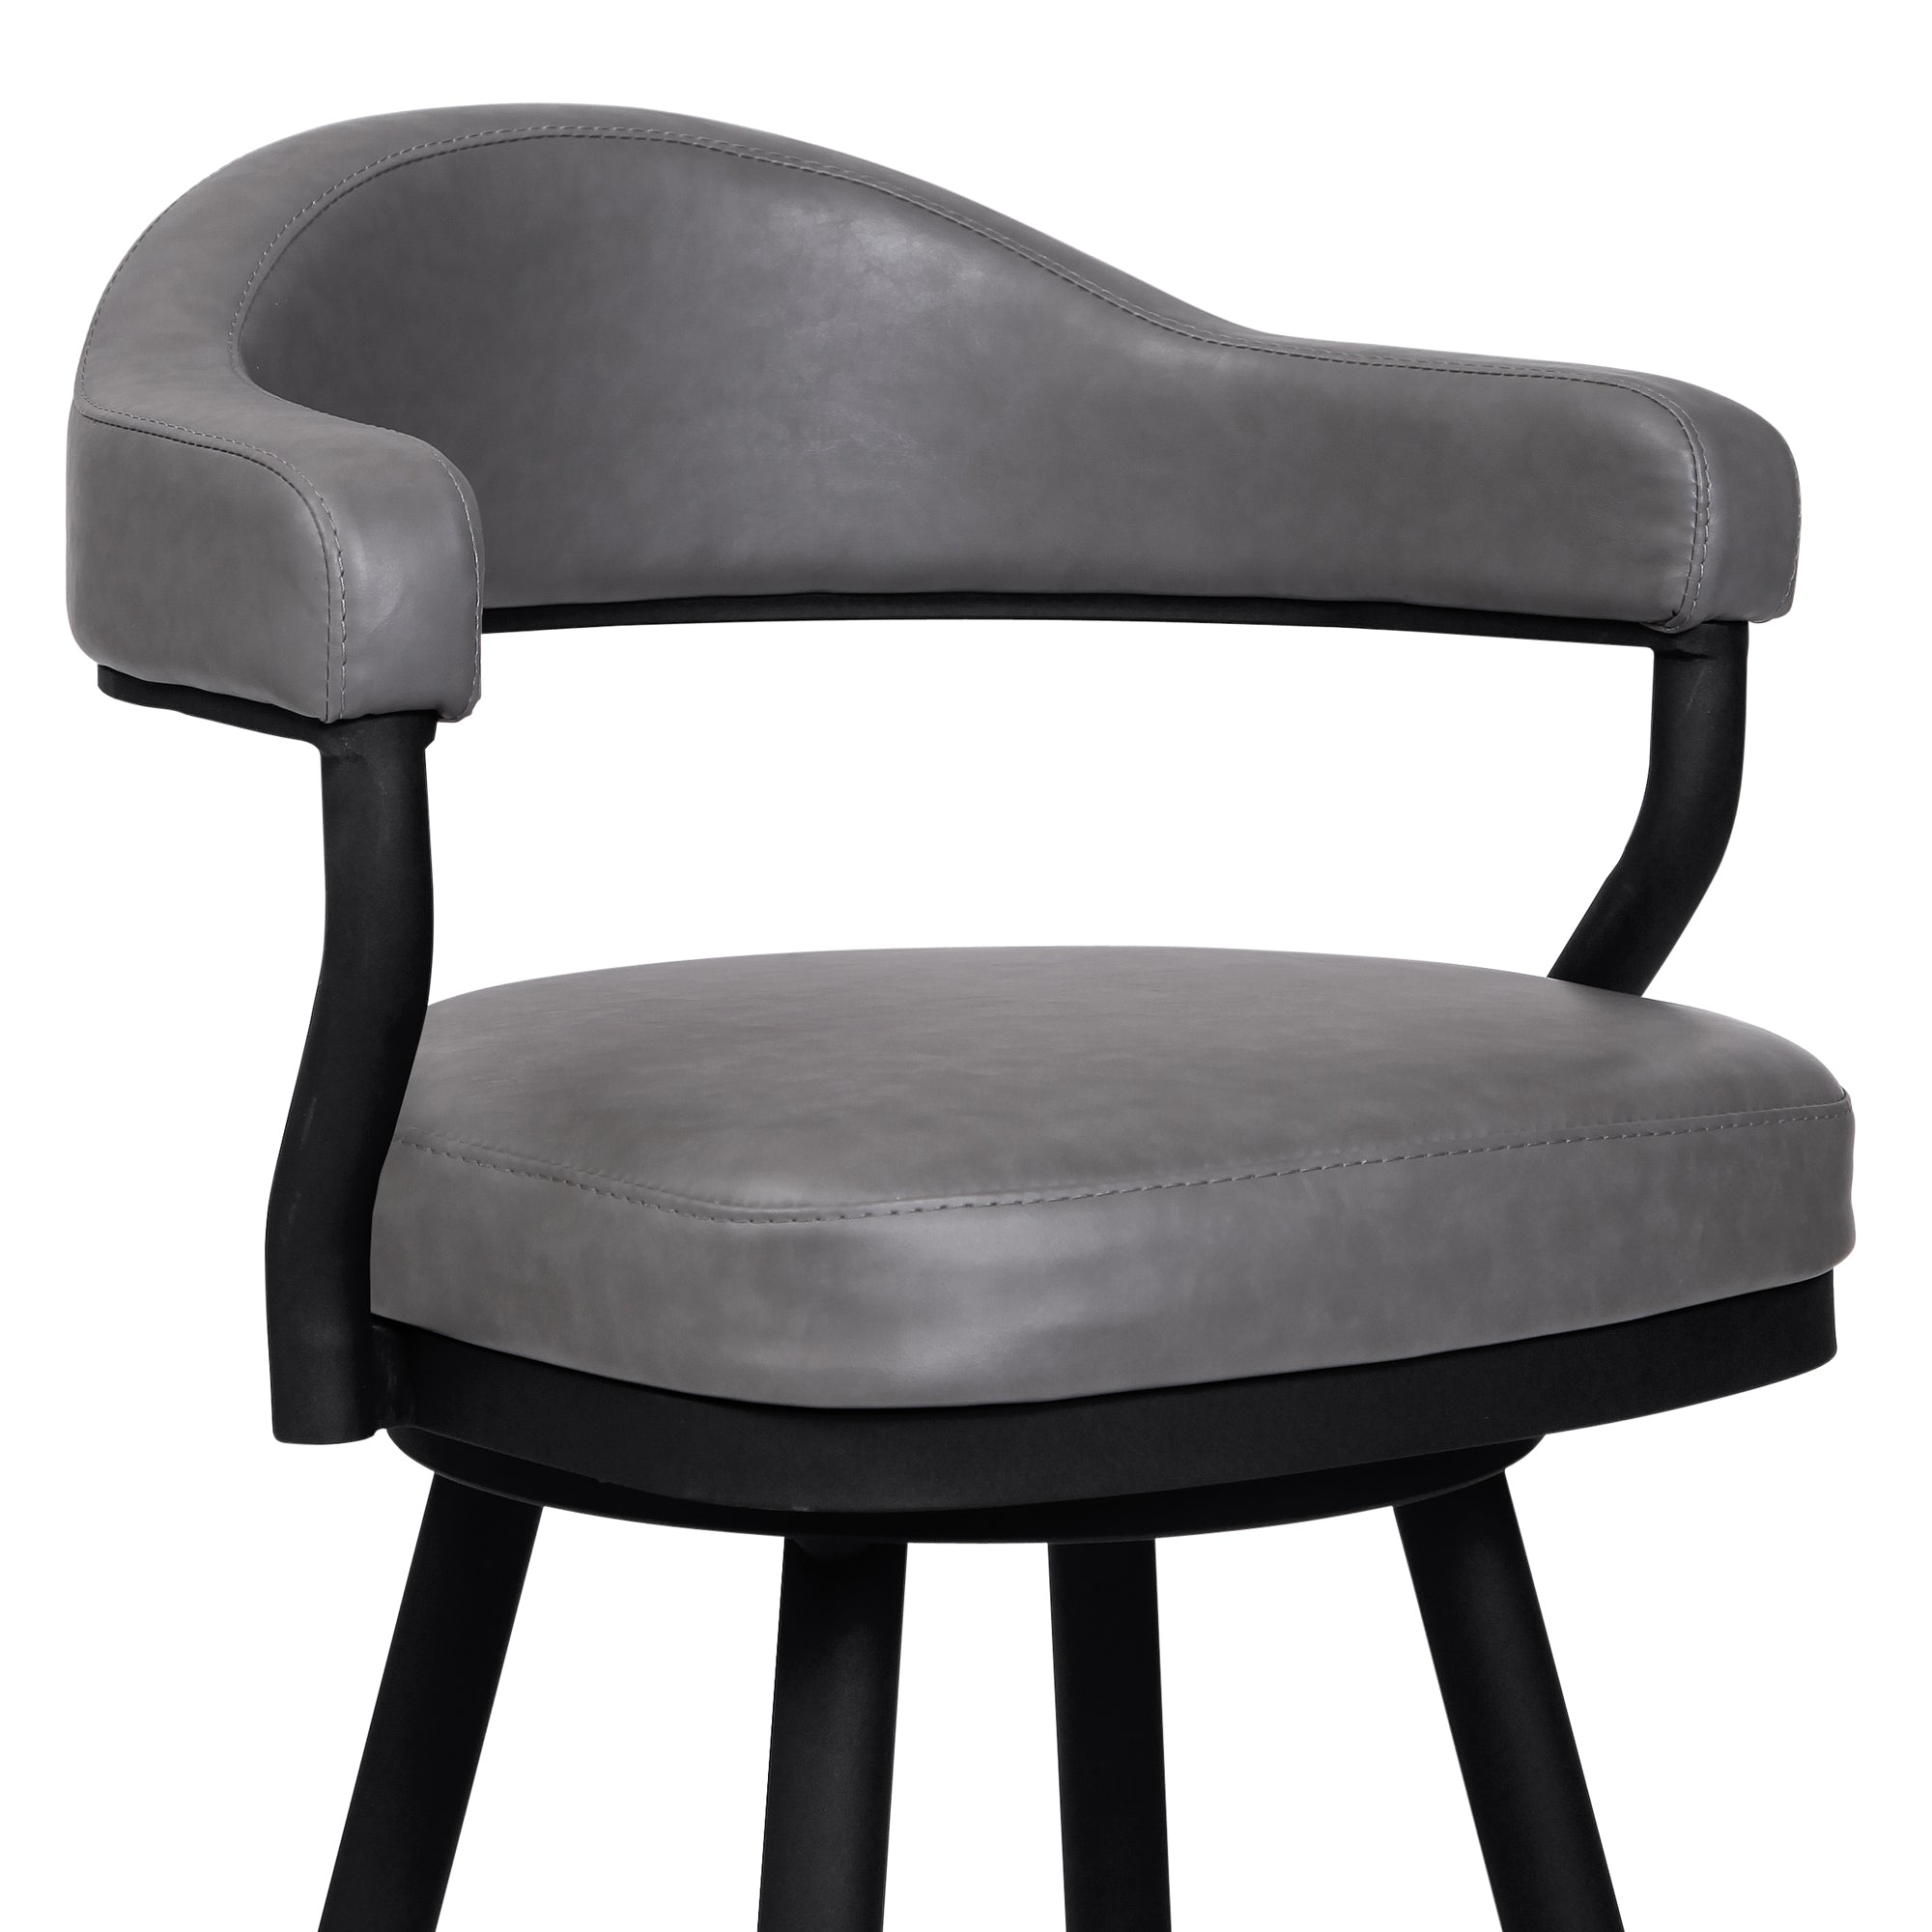 Justin  Counter Stool in a Black Powder Coated Finish and Vintage Grey Faux Leather